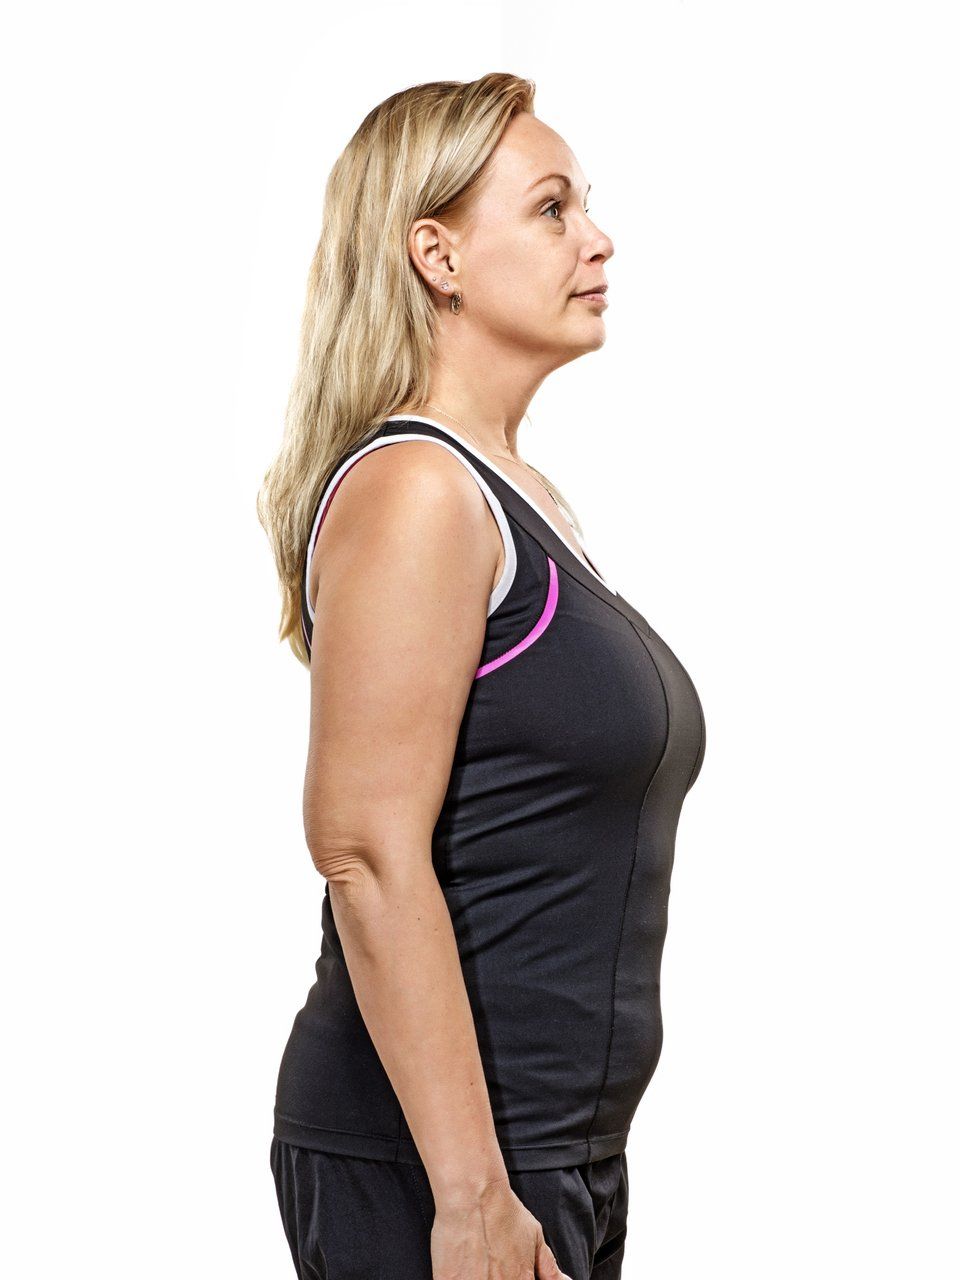 a woman in a black tank top is standing in front of a white background .